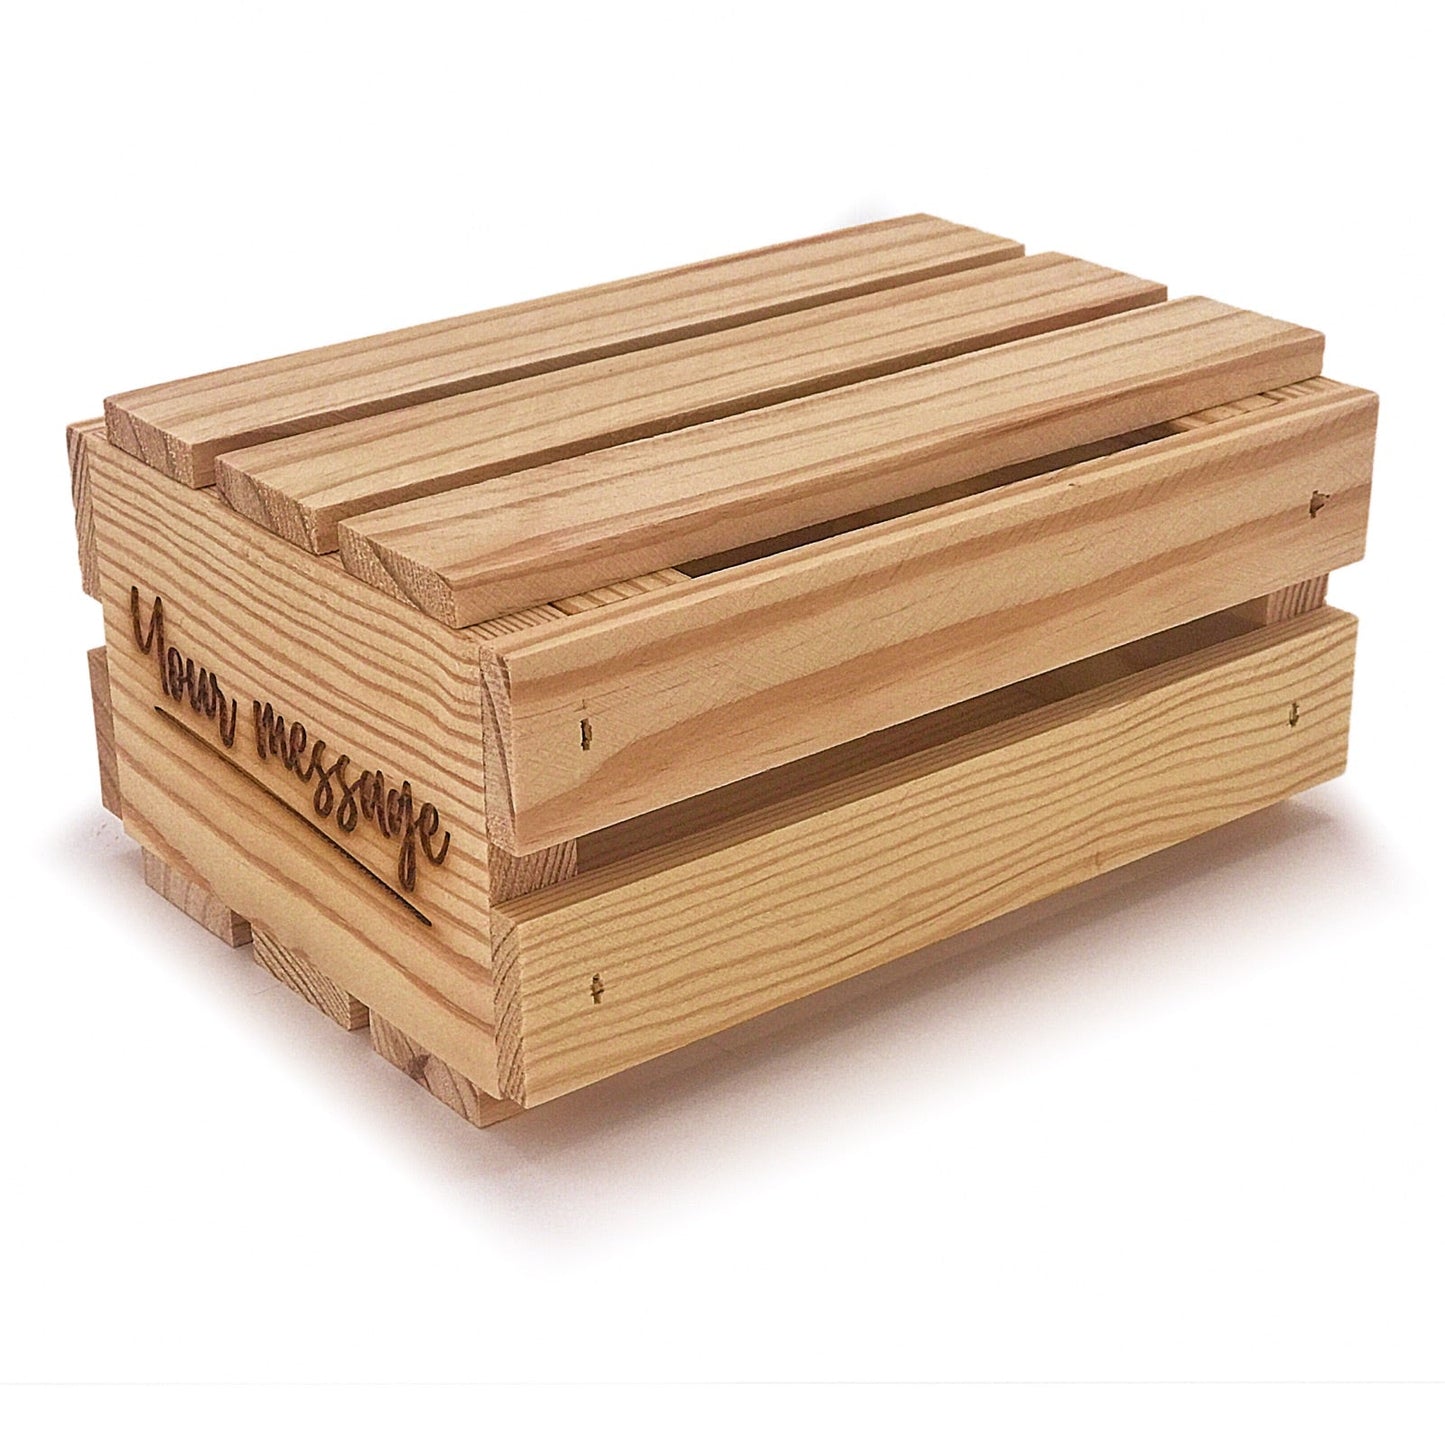 Small wooden crate with lid and custom message 7.125x5.5x3.5, 6-S2-7.125-5.5-3.5-ST-NW-LL, 12-S2-7.125-5.5-3.5-ST-NW-LL, 24-S2-7.125-5.5-3.5-ST-NW-LL, 48-S2-7.125-5.5-3.5-ST-NW-LL, 96-S2-7.125-5.5-3.5-ST-NW-LL